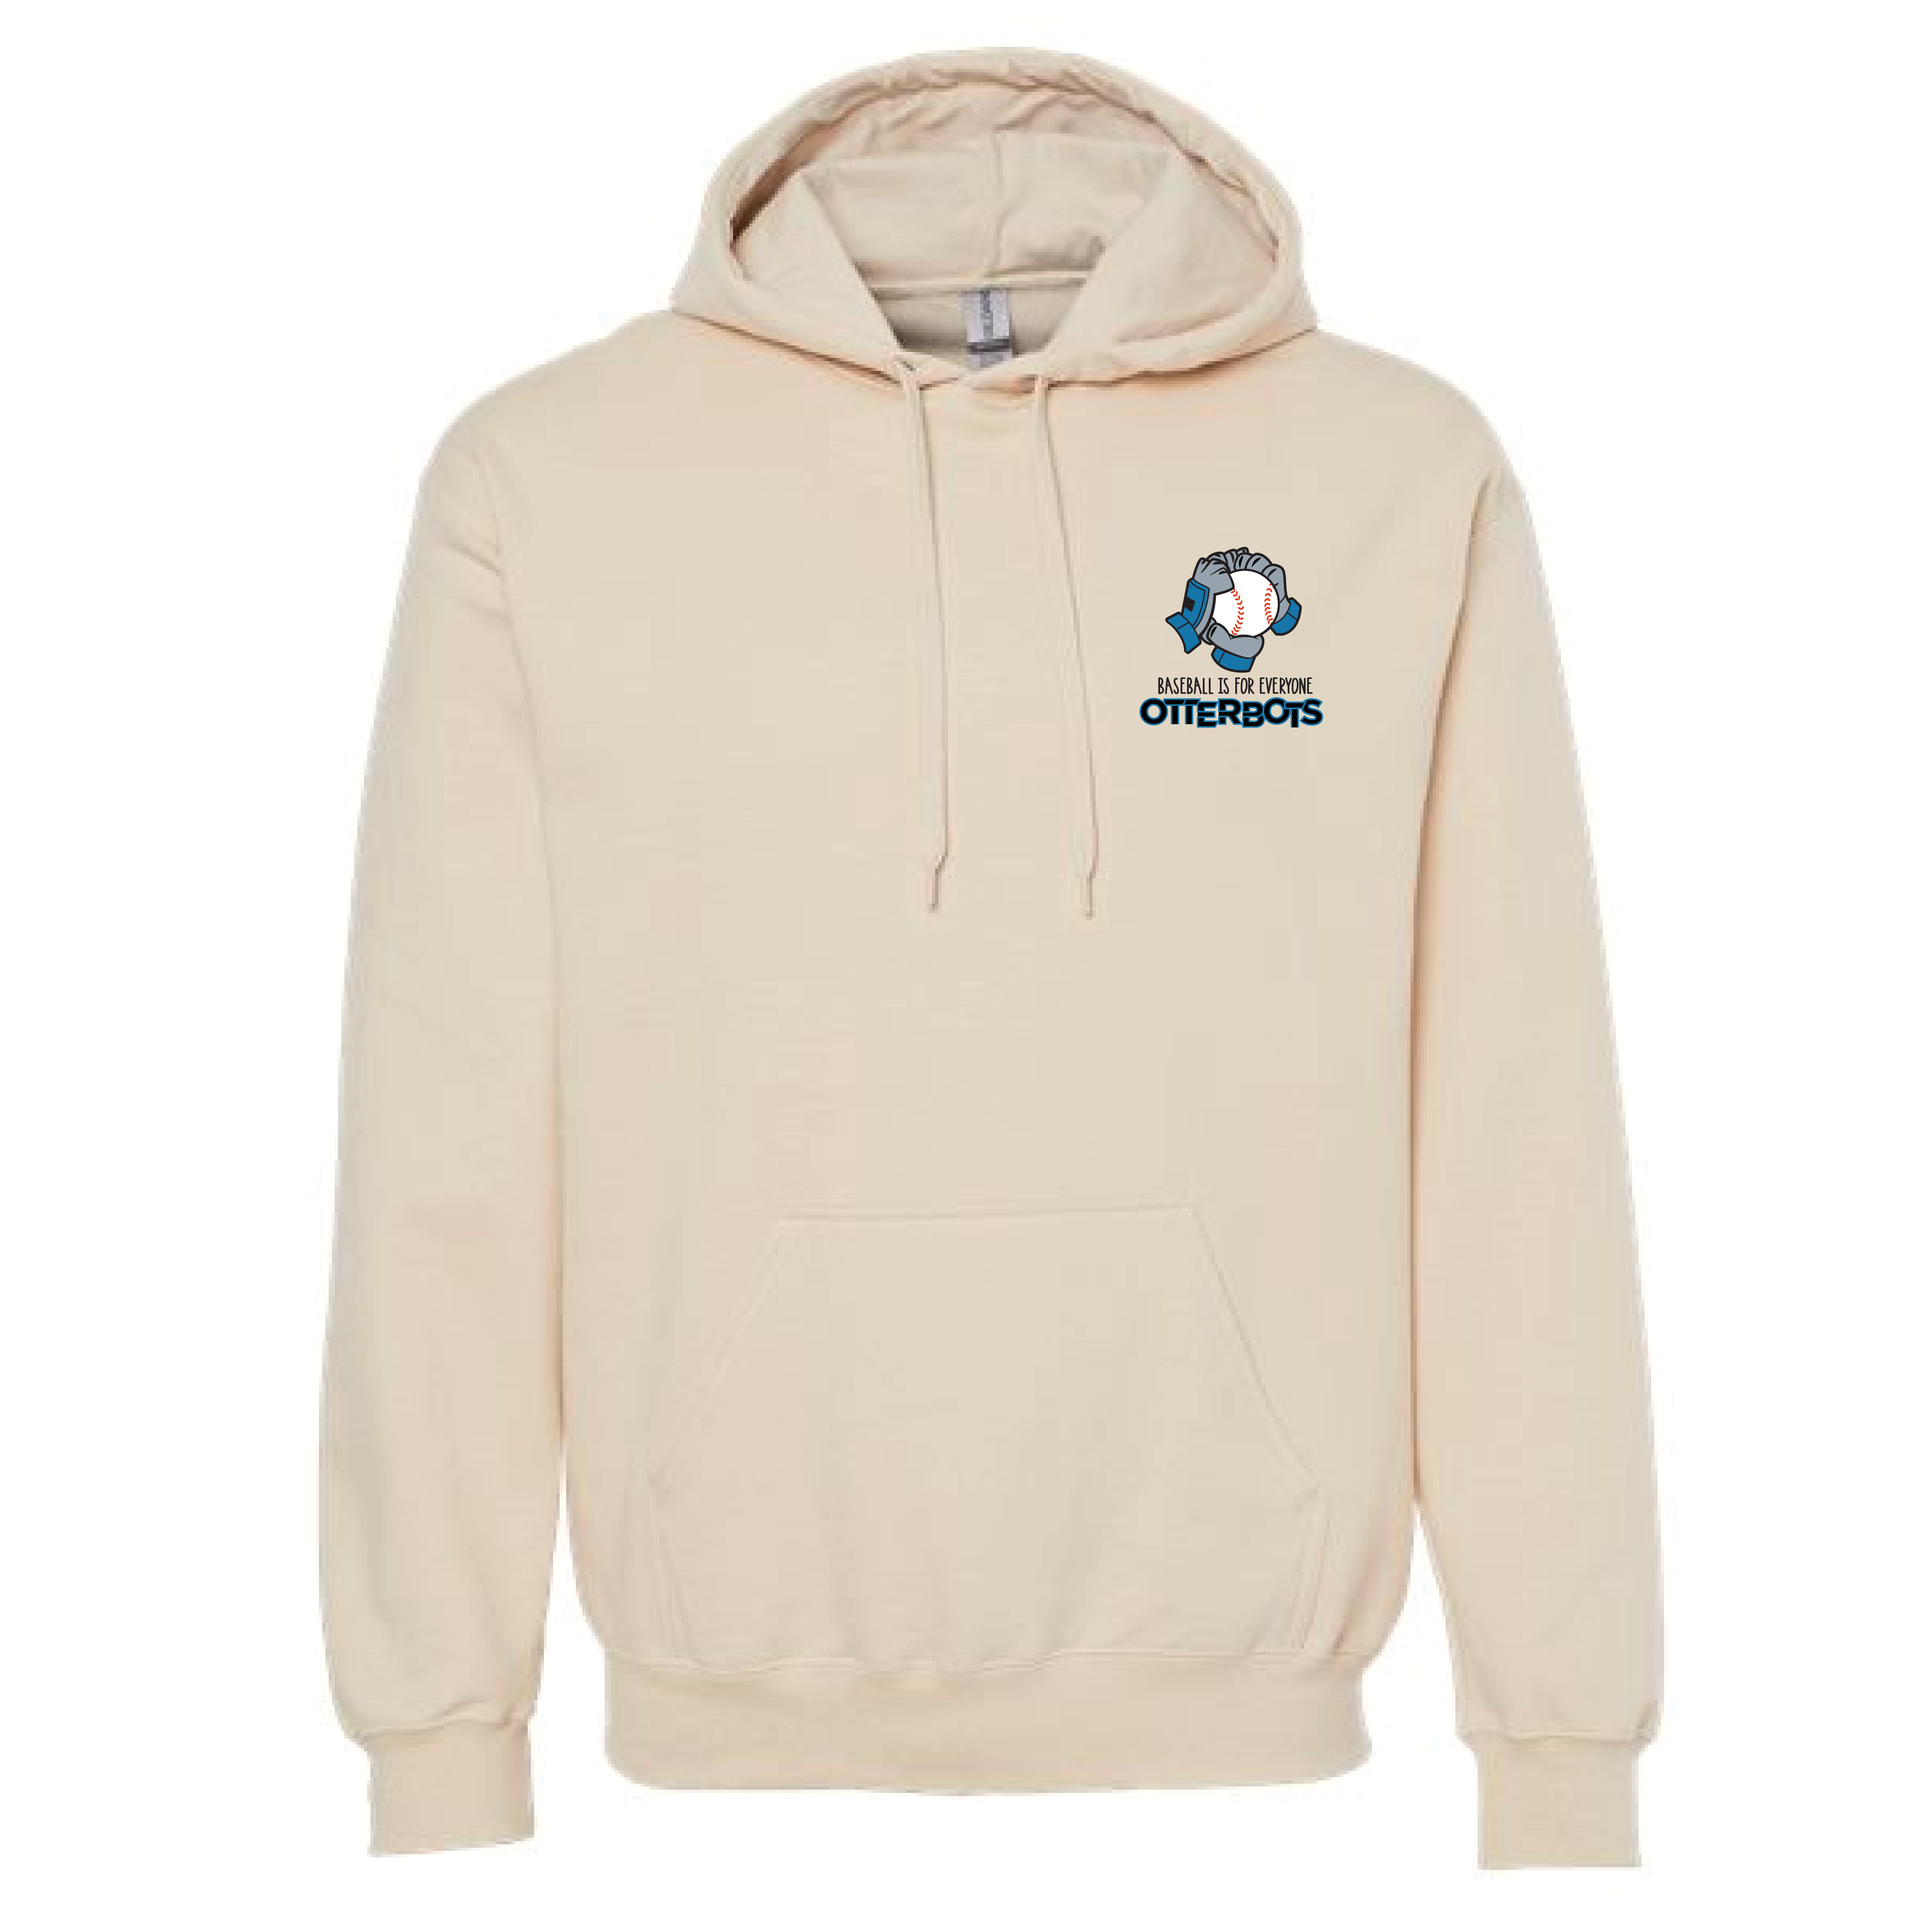 Otterbots Softstyle Hoodie - Baseball is for Everyone-0